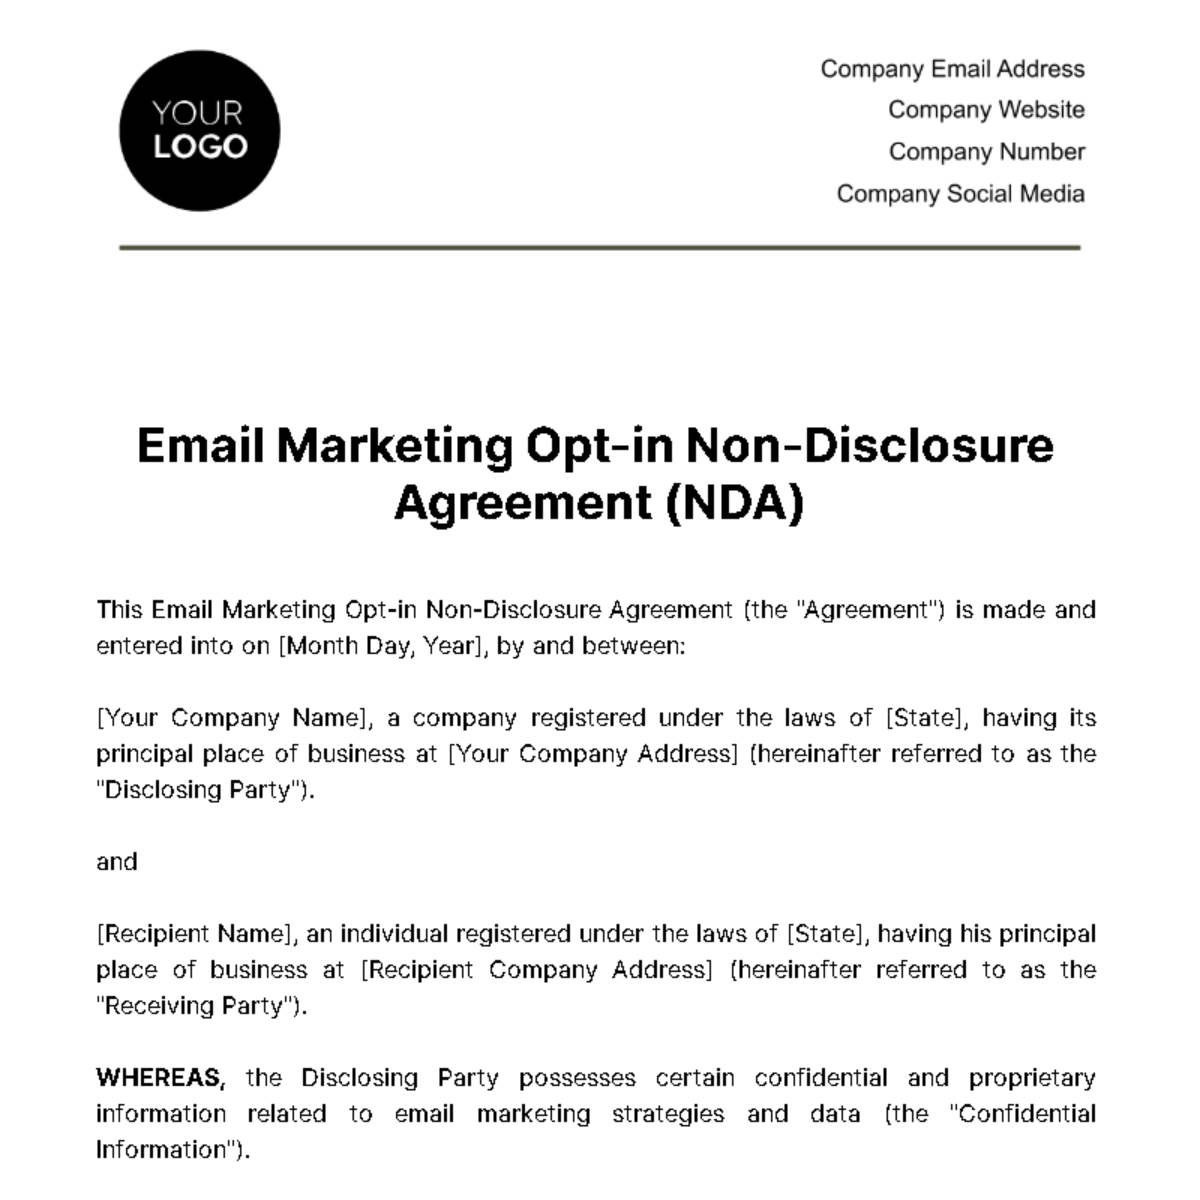 Email Marketing Opt-in NDA Template